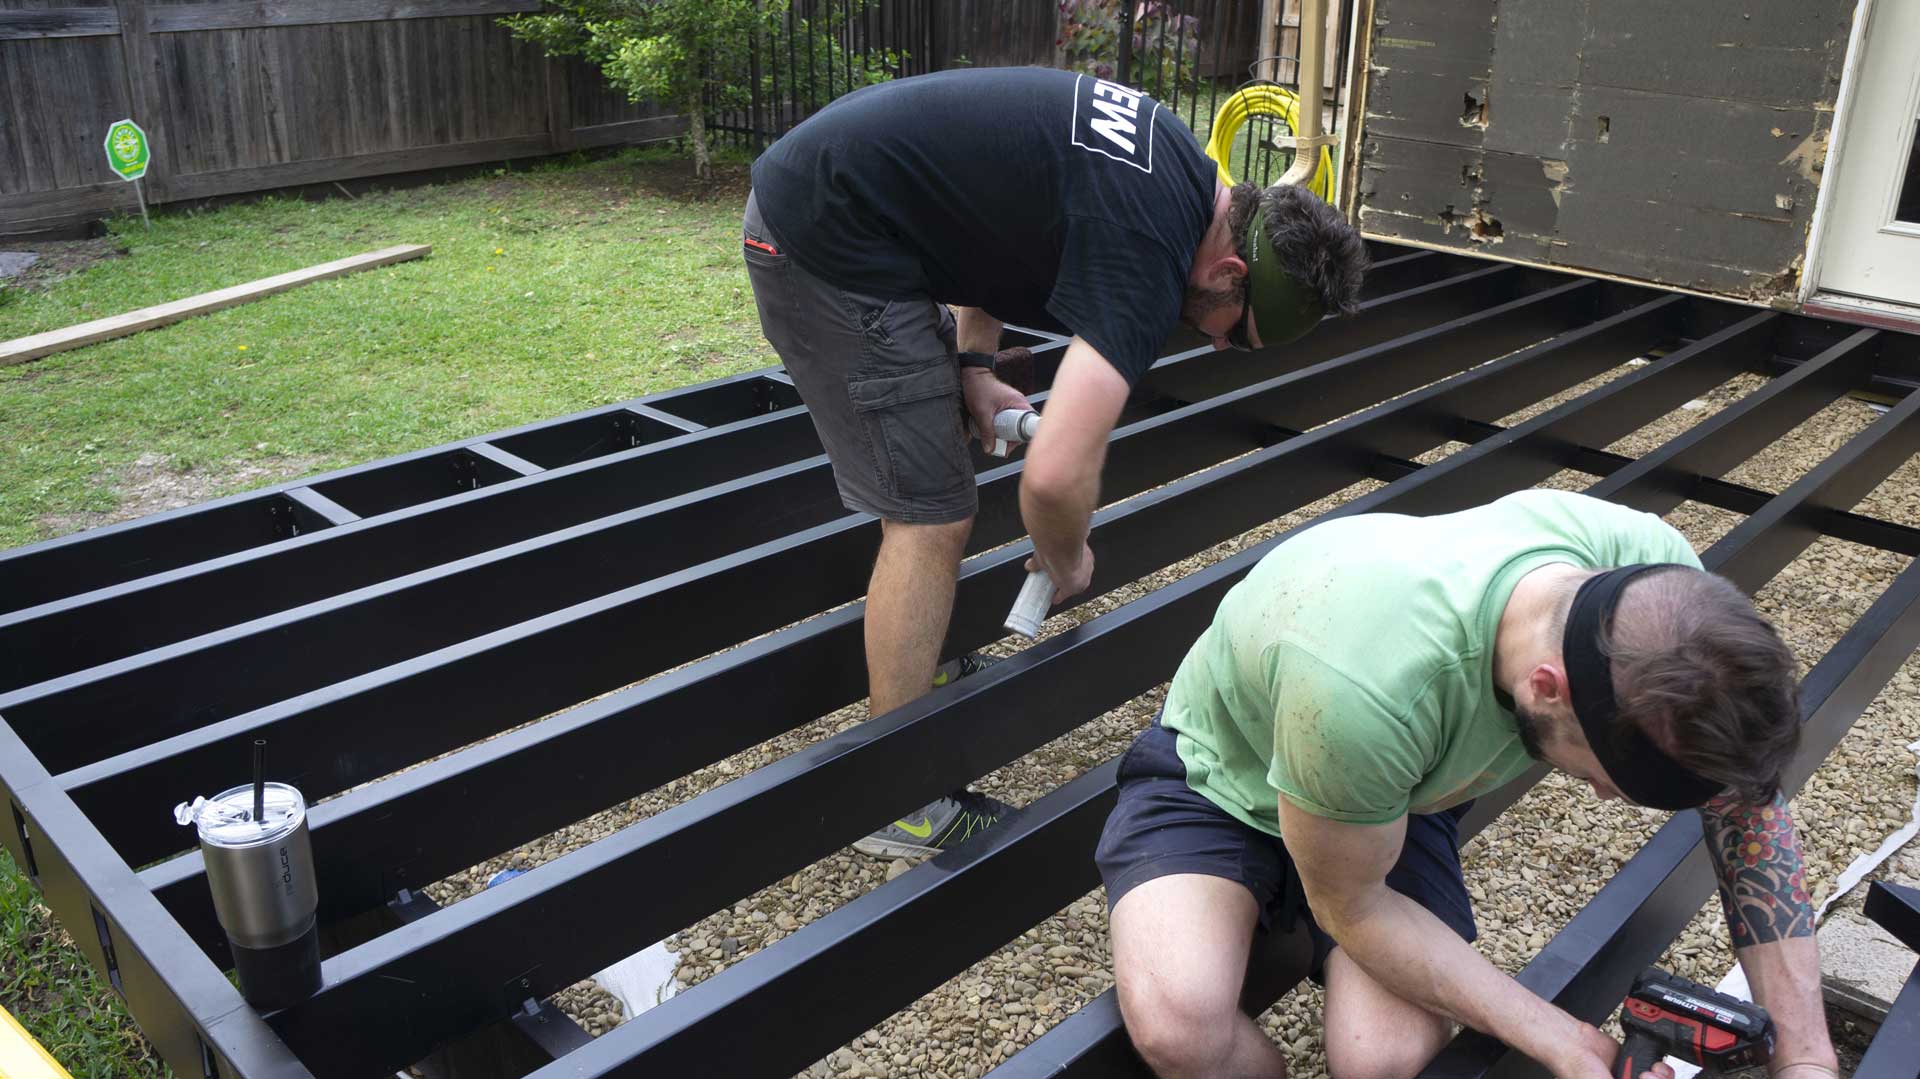 Two workers assembling a steel deck substructure in a backyard.